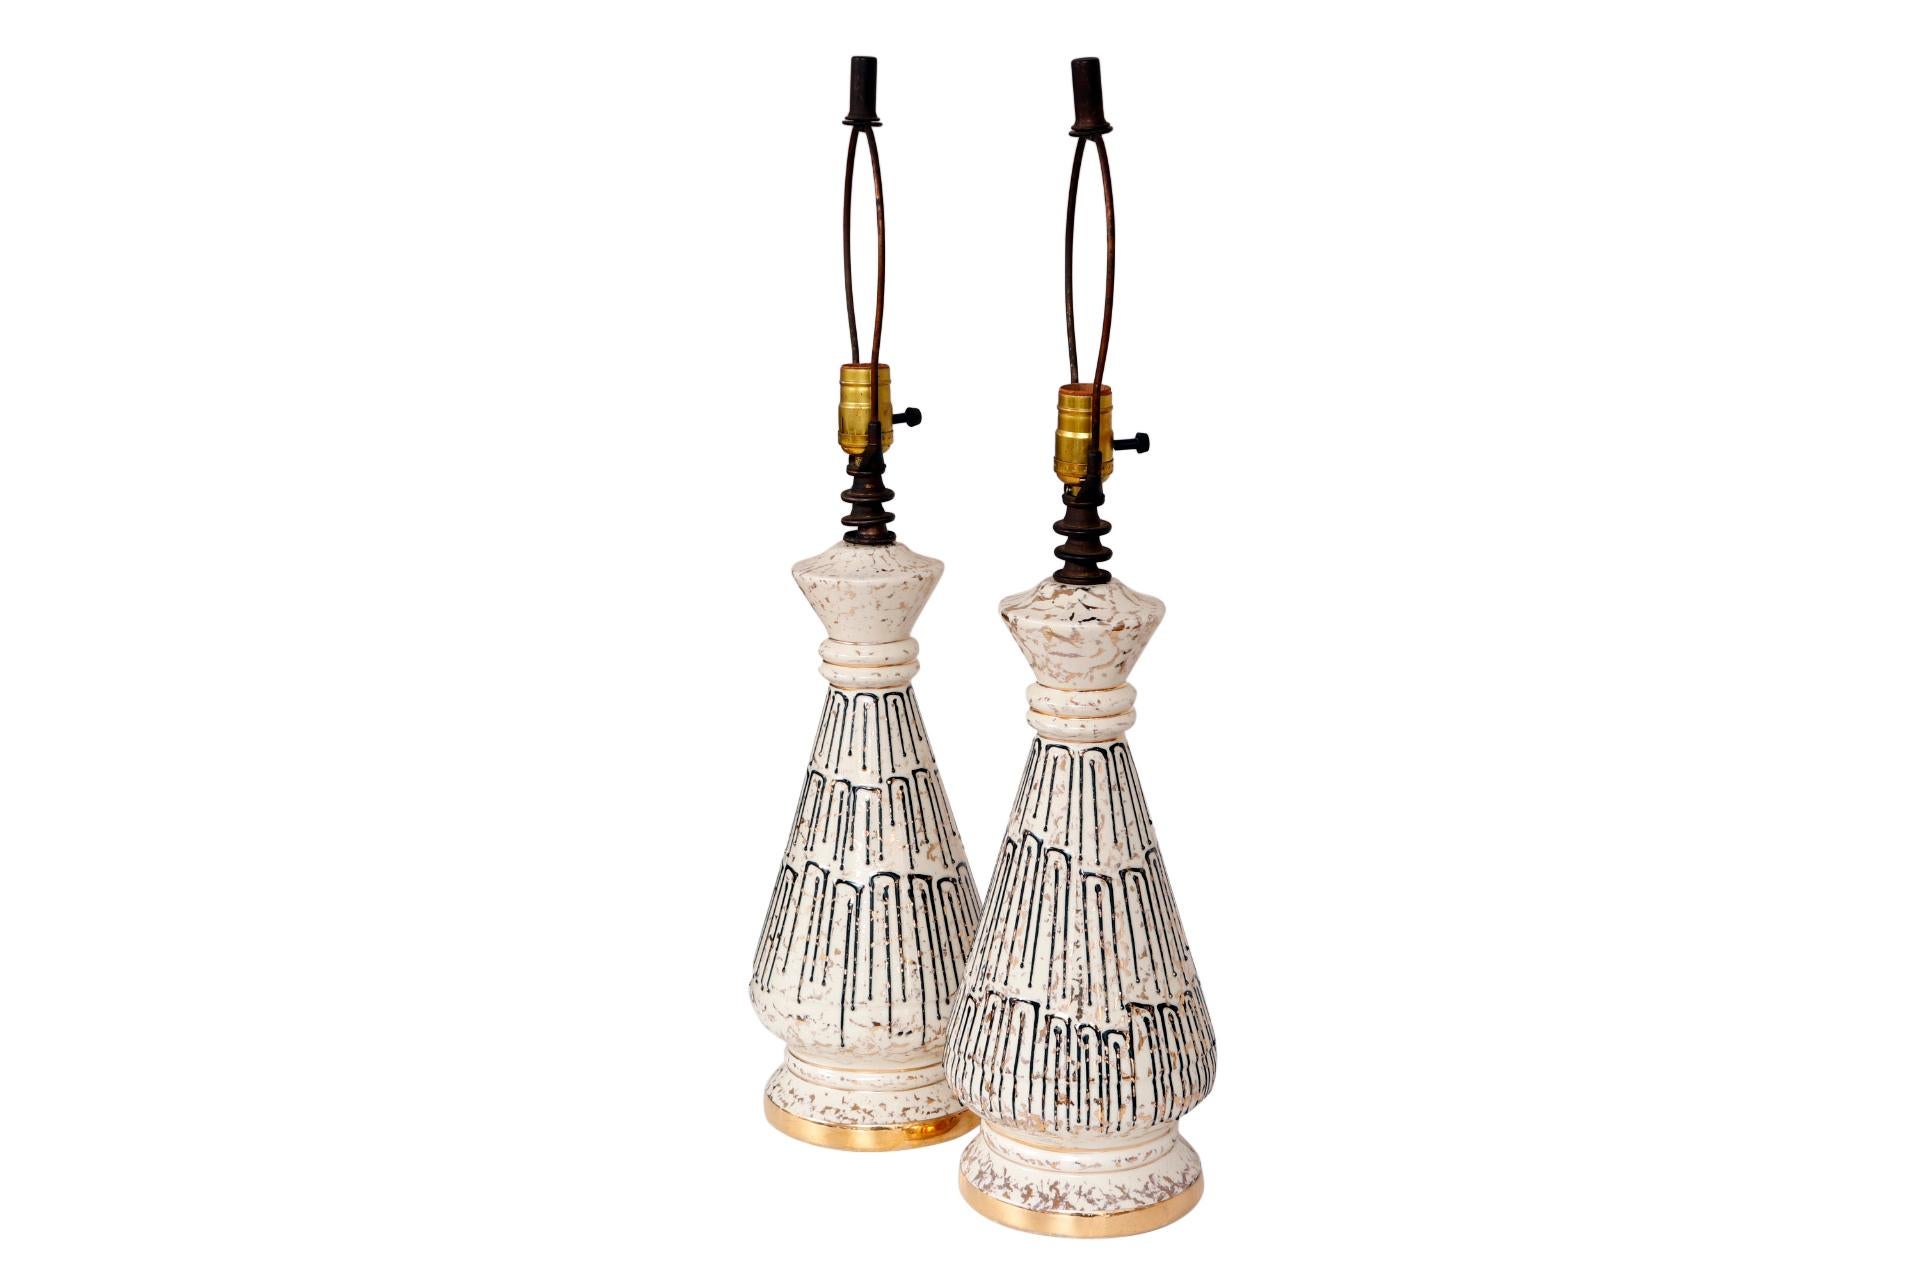 A pair of mid century atomic style ceramic lamps in white, black and gold. Round lamps that taper upwards are decorated with rectangular dripped black lines, mirrored on the shades, and flecked with gold. Bases are trimmed with gold bands. Each lamp